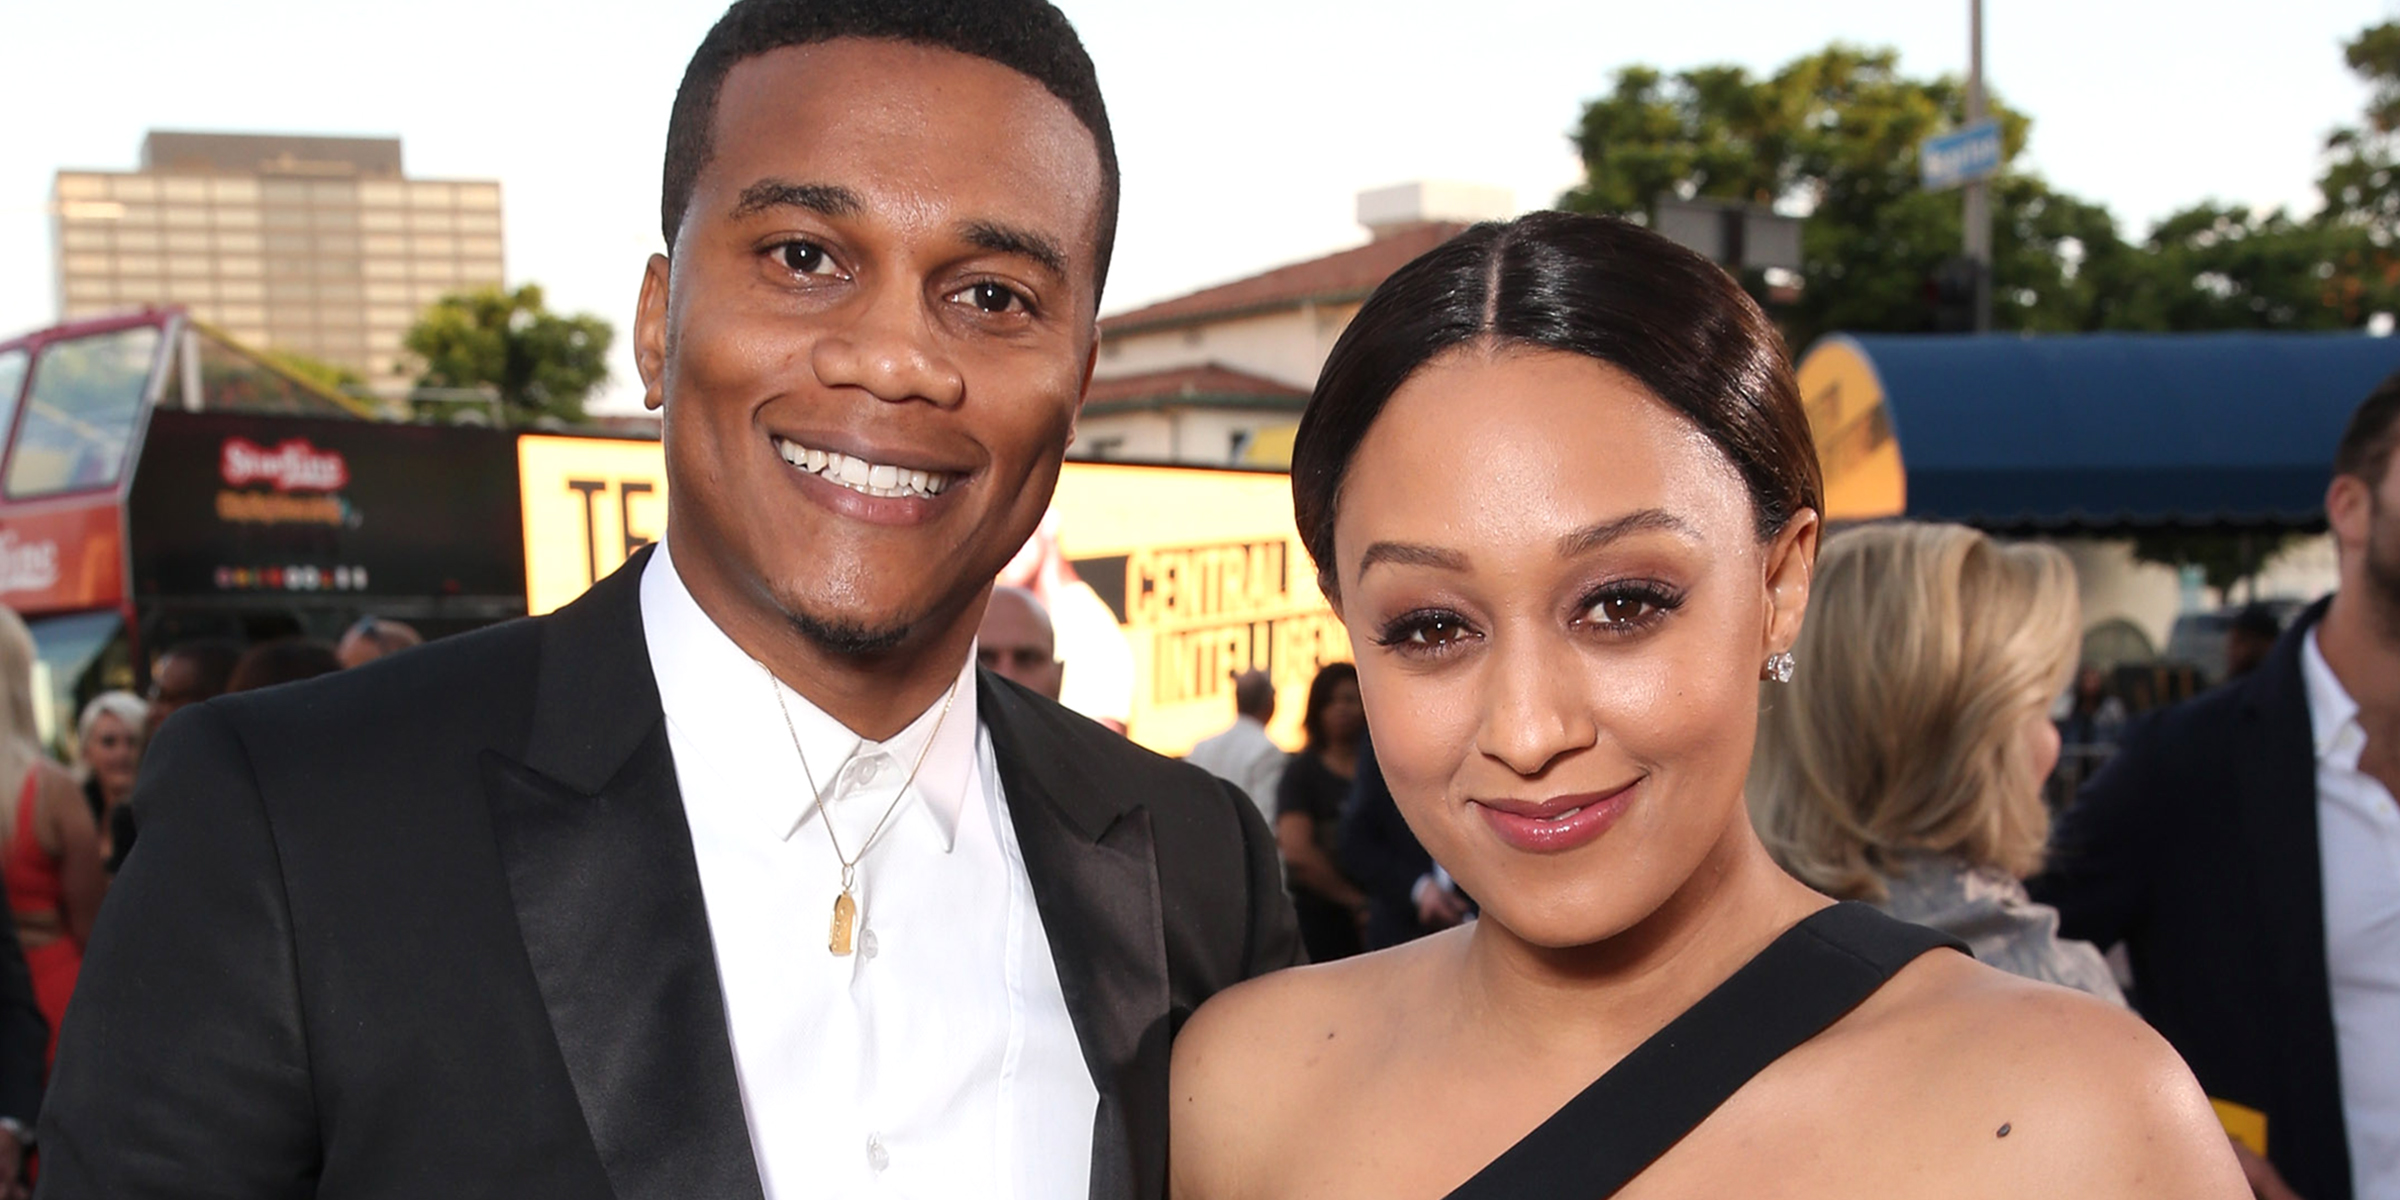 Tia Mowry Admits to Scheduling Sex Dates With Her Husband: 'You Have to Make Sure It's Not Neglected'